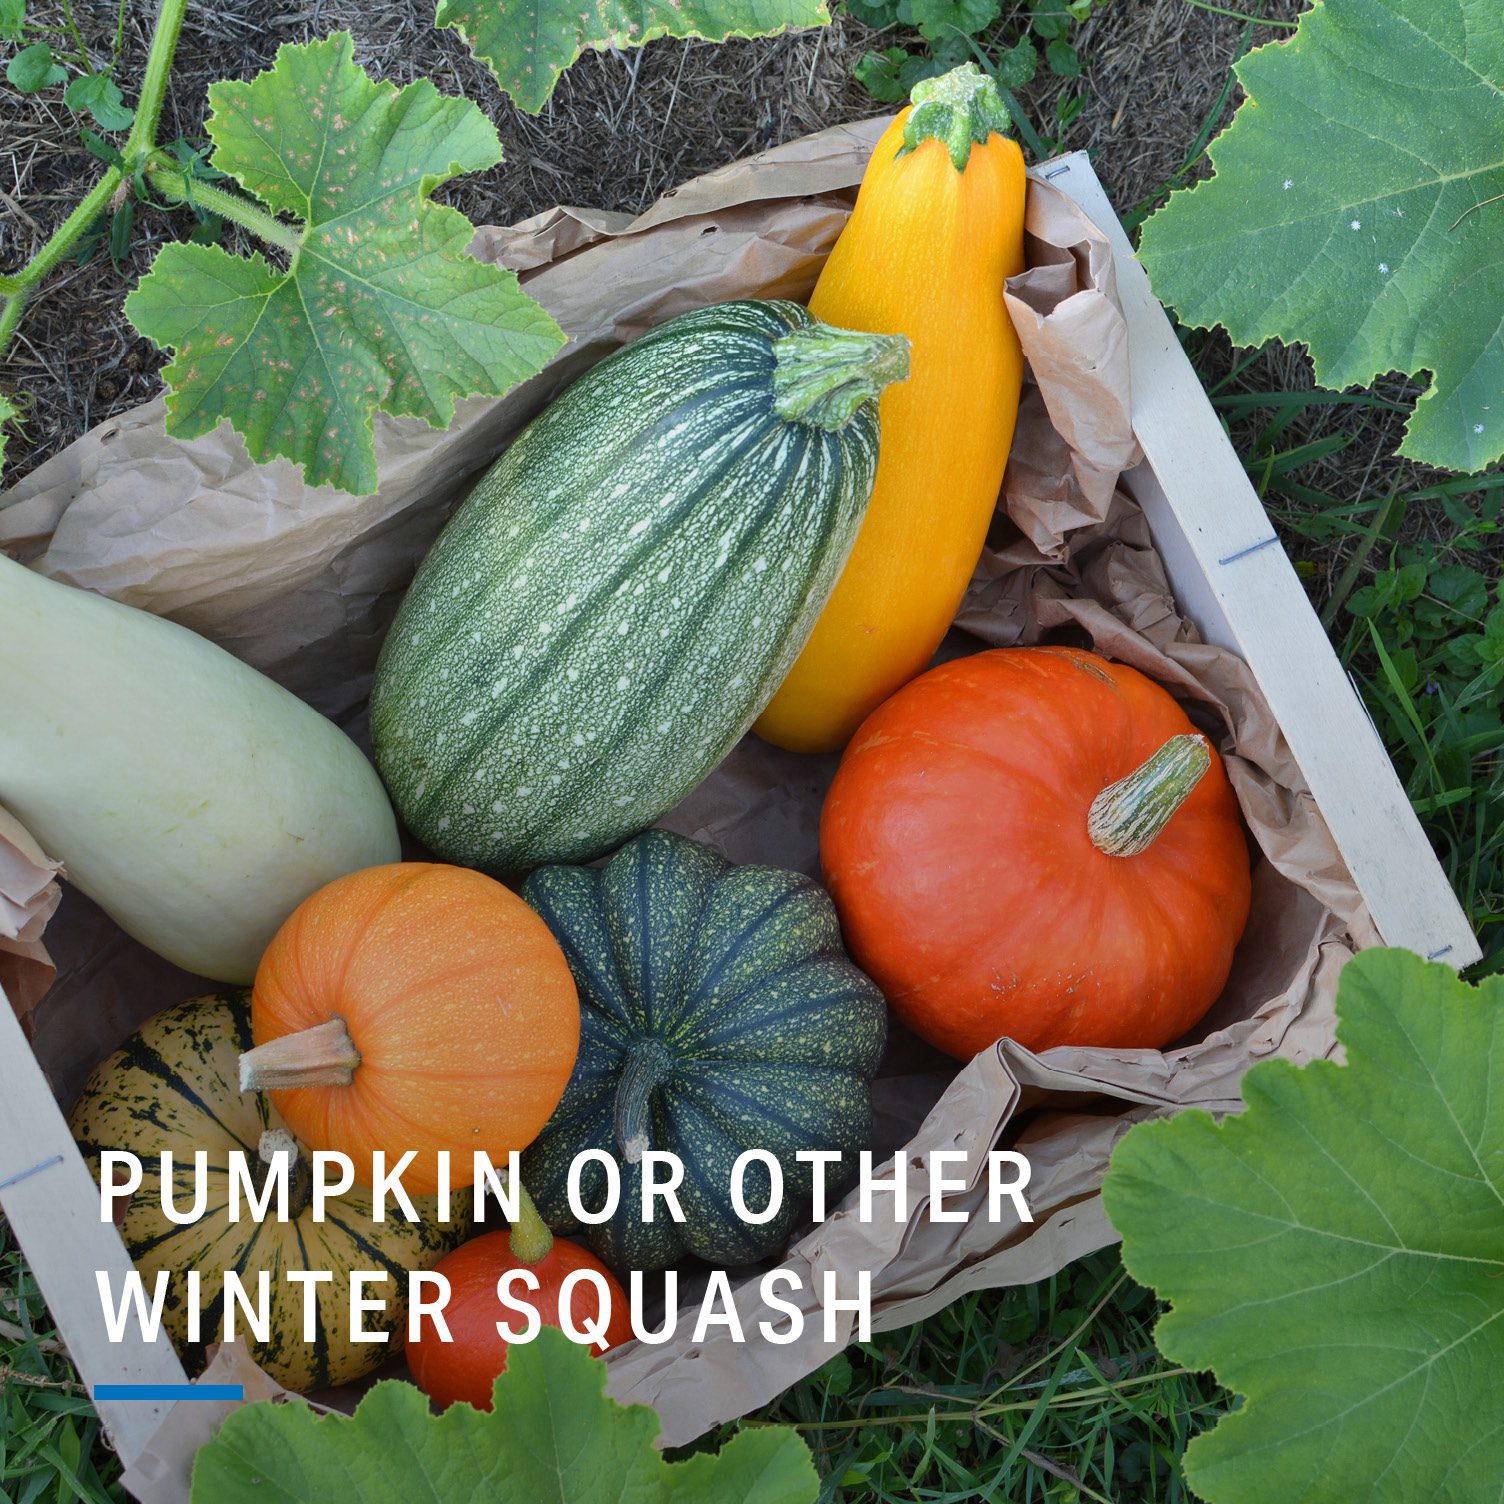 10 Seasonal Fruits and Vegetables to Eat This Fall